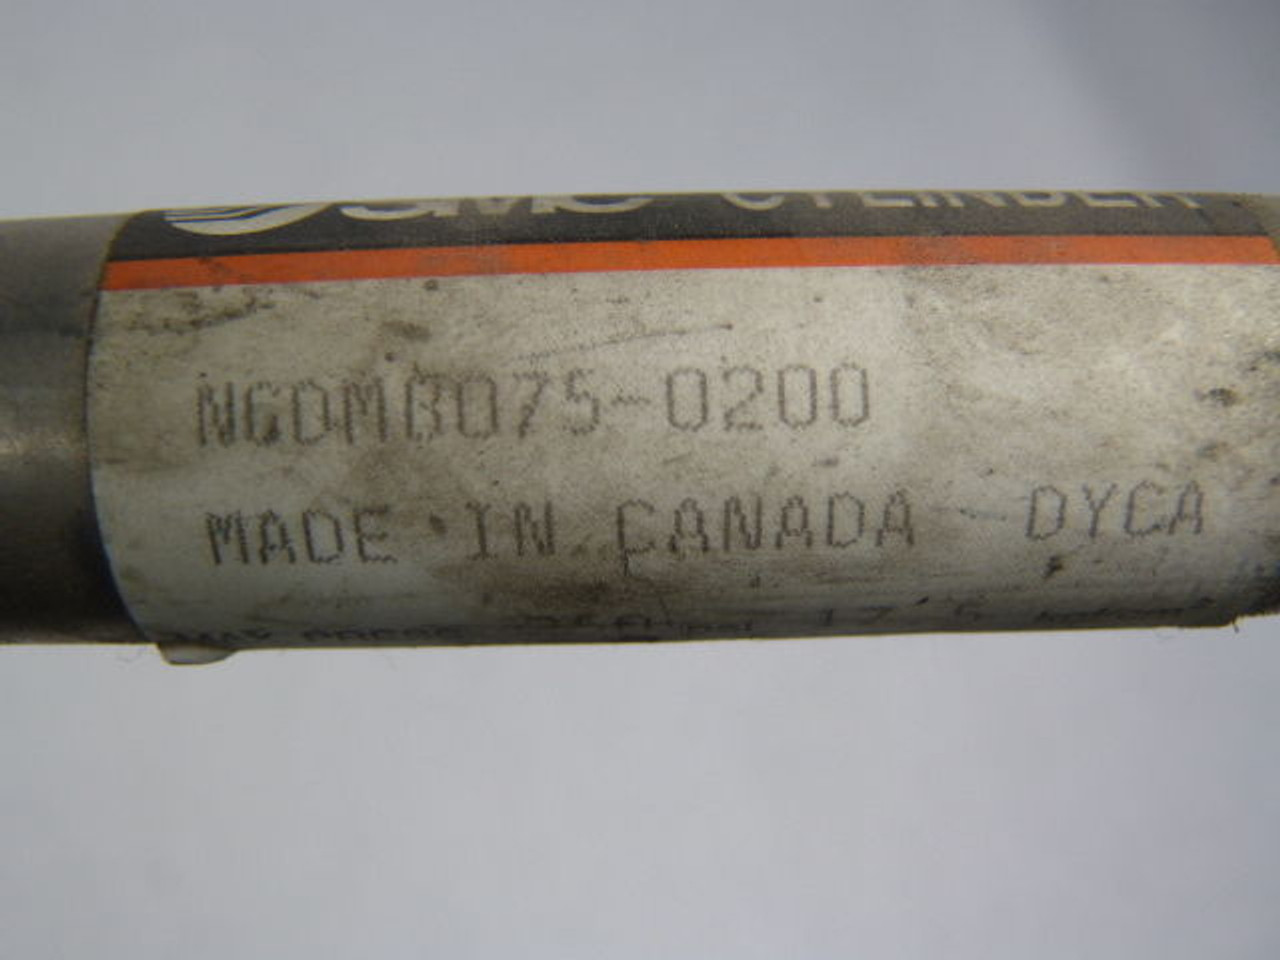 SMC NCDMB075-0200 Auto-Switch Pneumatic Cylinder 3/4" Bore 2" Stroke USED